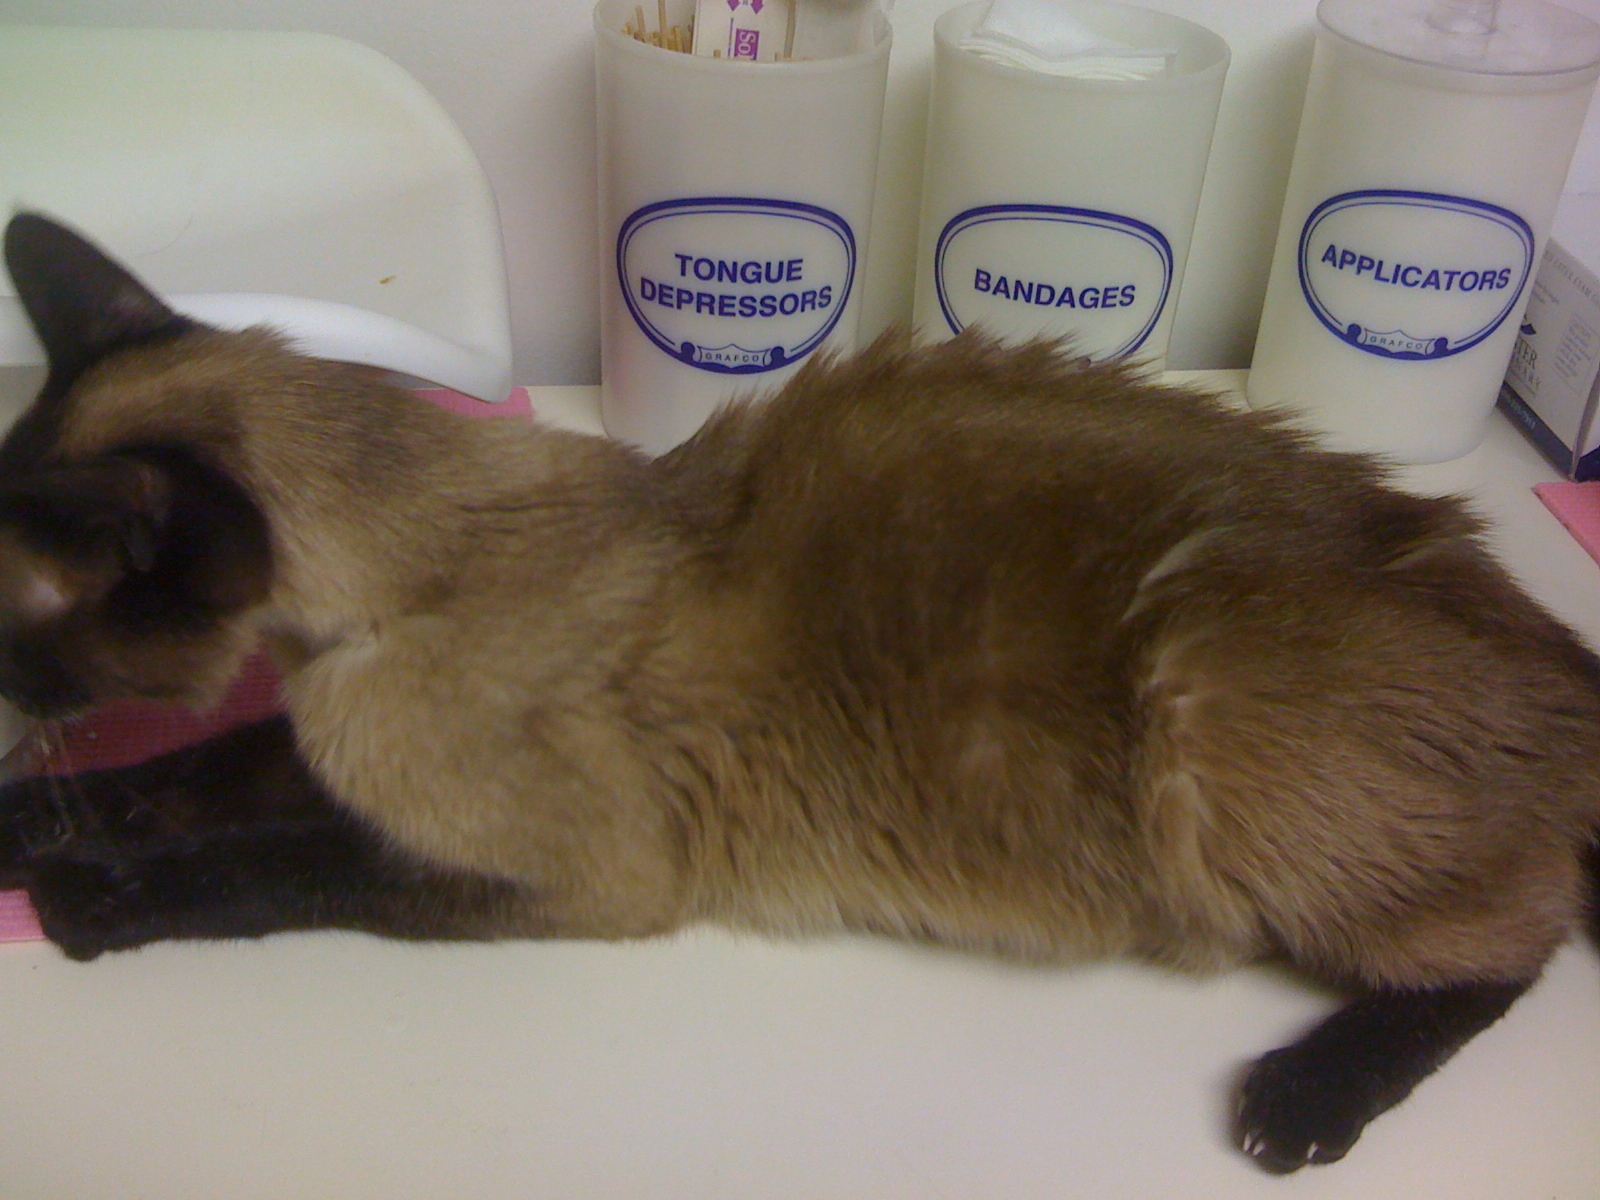 17-Year-Old Cat Treated for Multiple Diseases at the Same Time